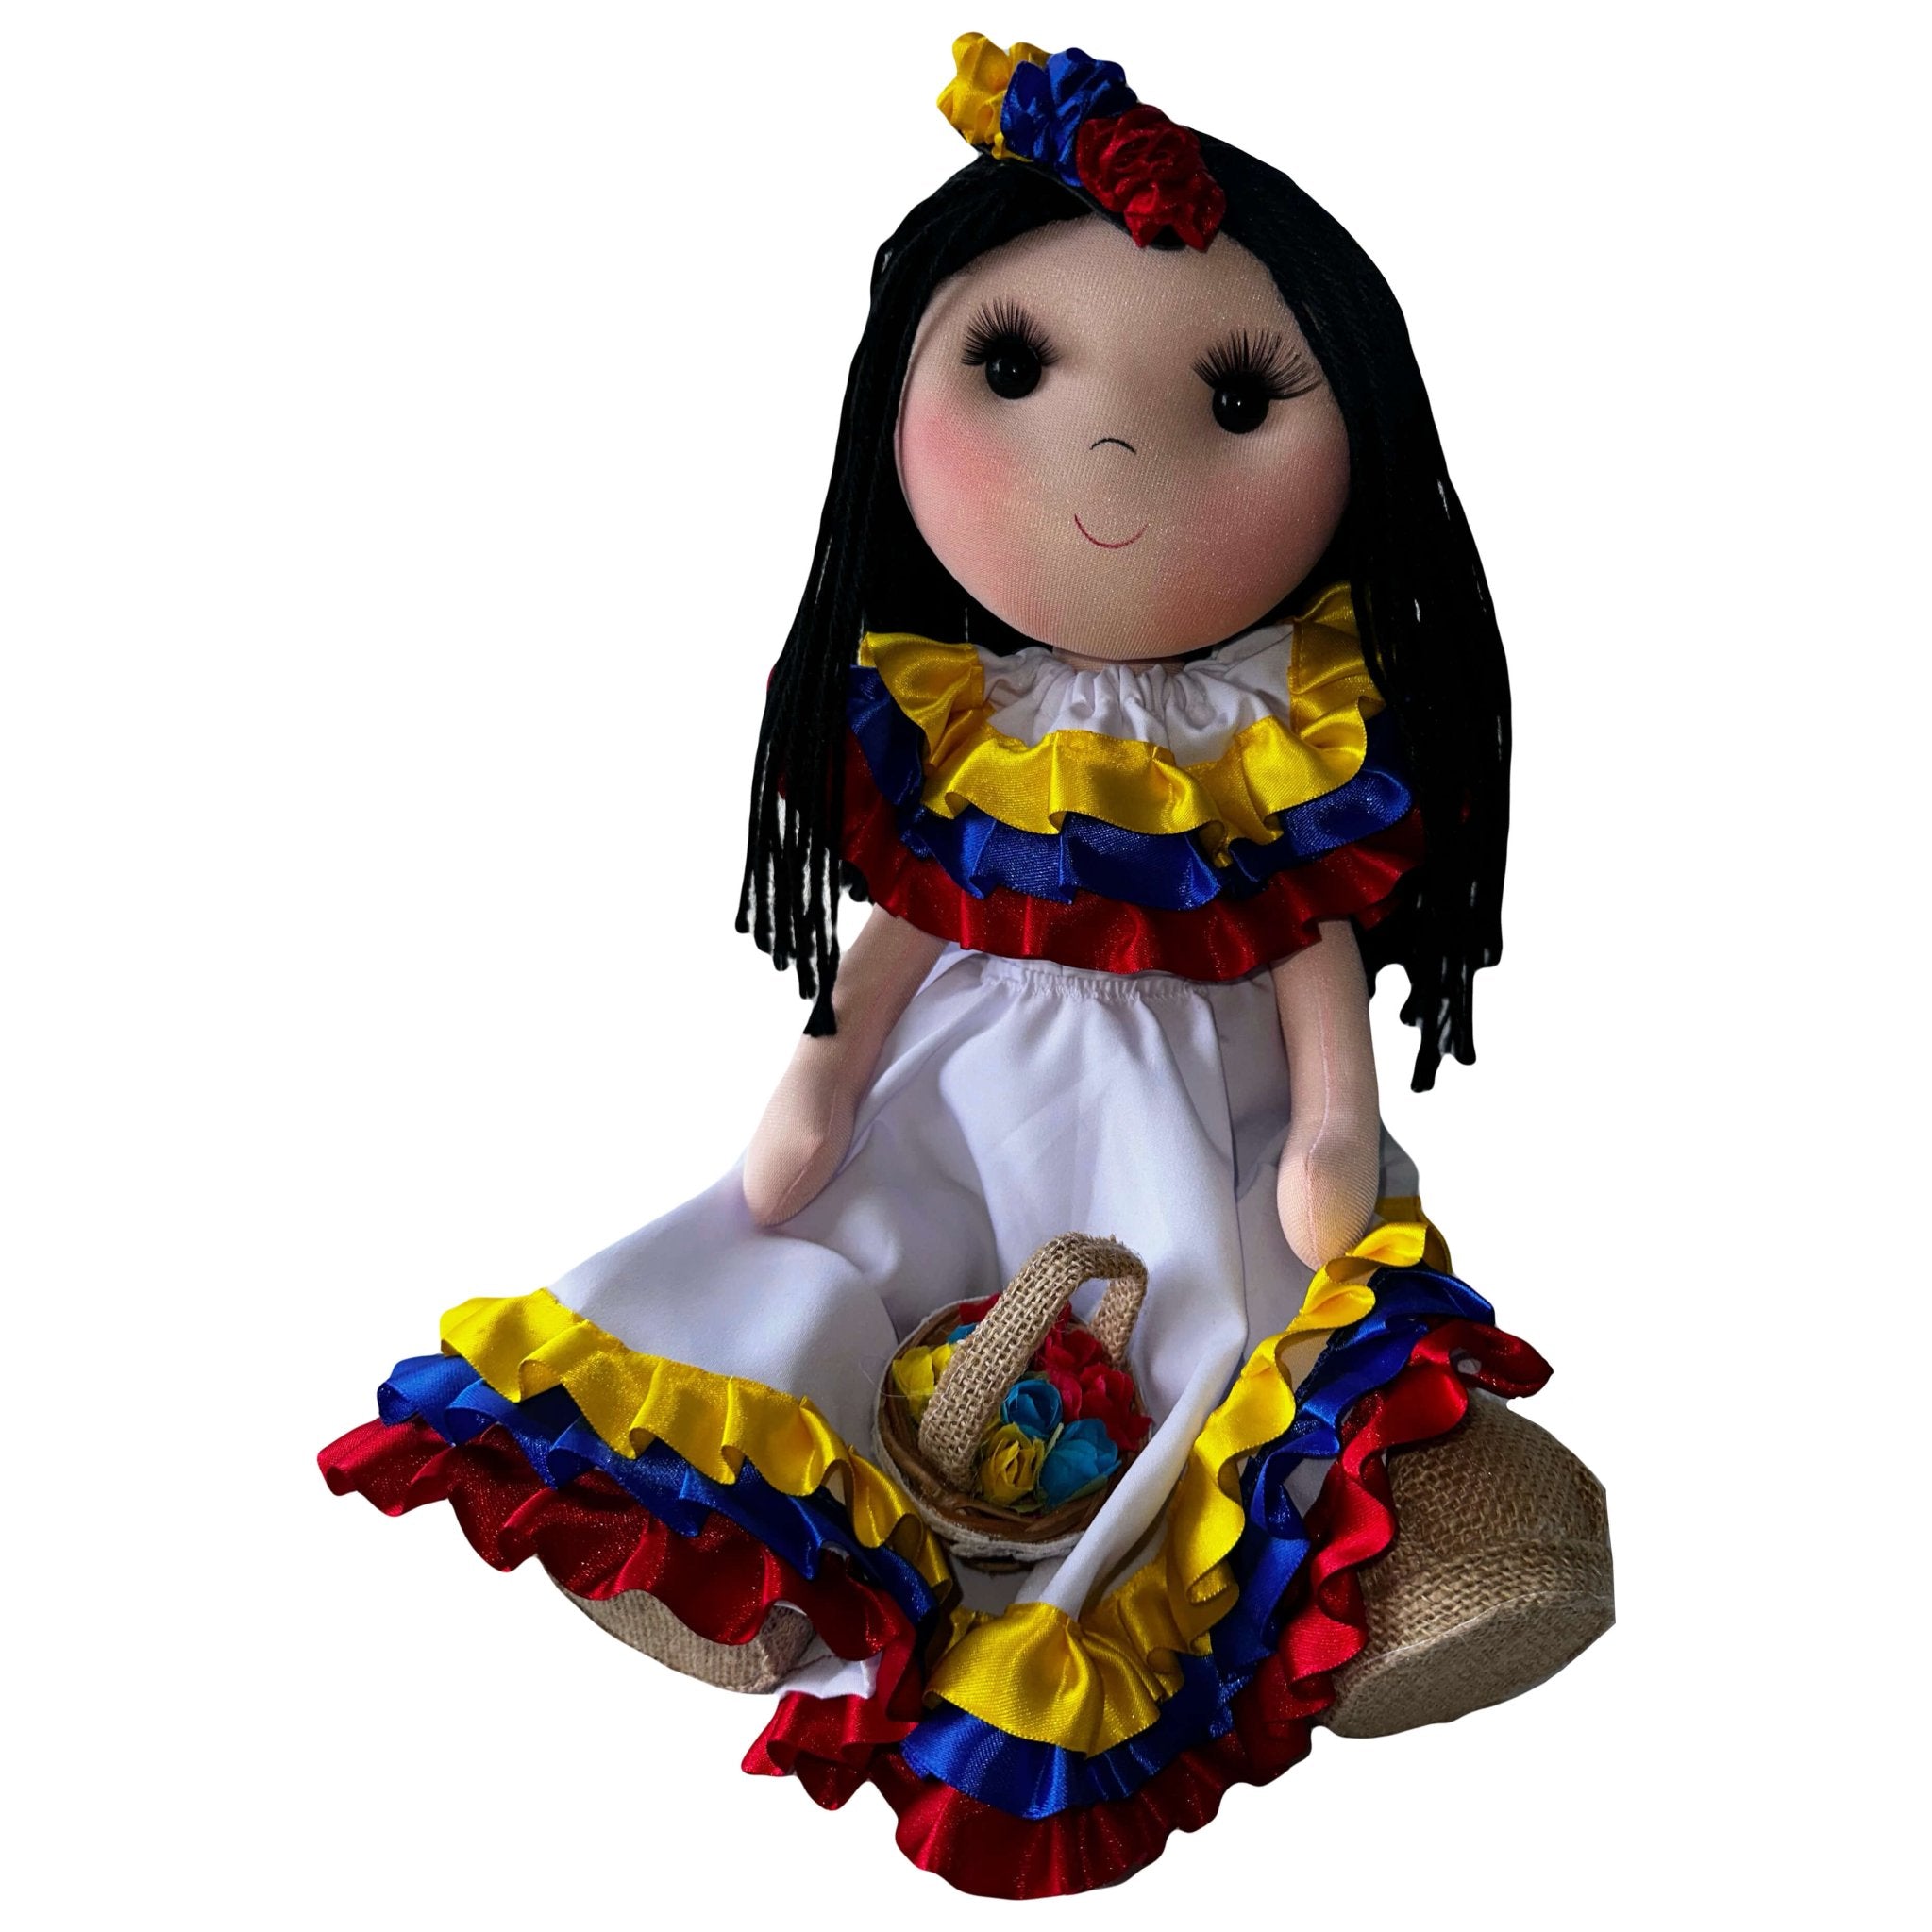 Rag Doll handmade in Colombia. She is wearing a white dress adorned with ruffles in colombian colors. She has straight hair, has a little colombian colored flower hair accessory. She is sitting with a basket of flowers.